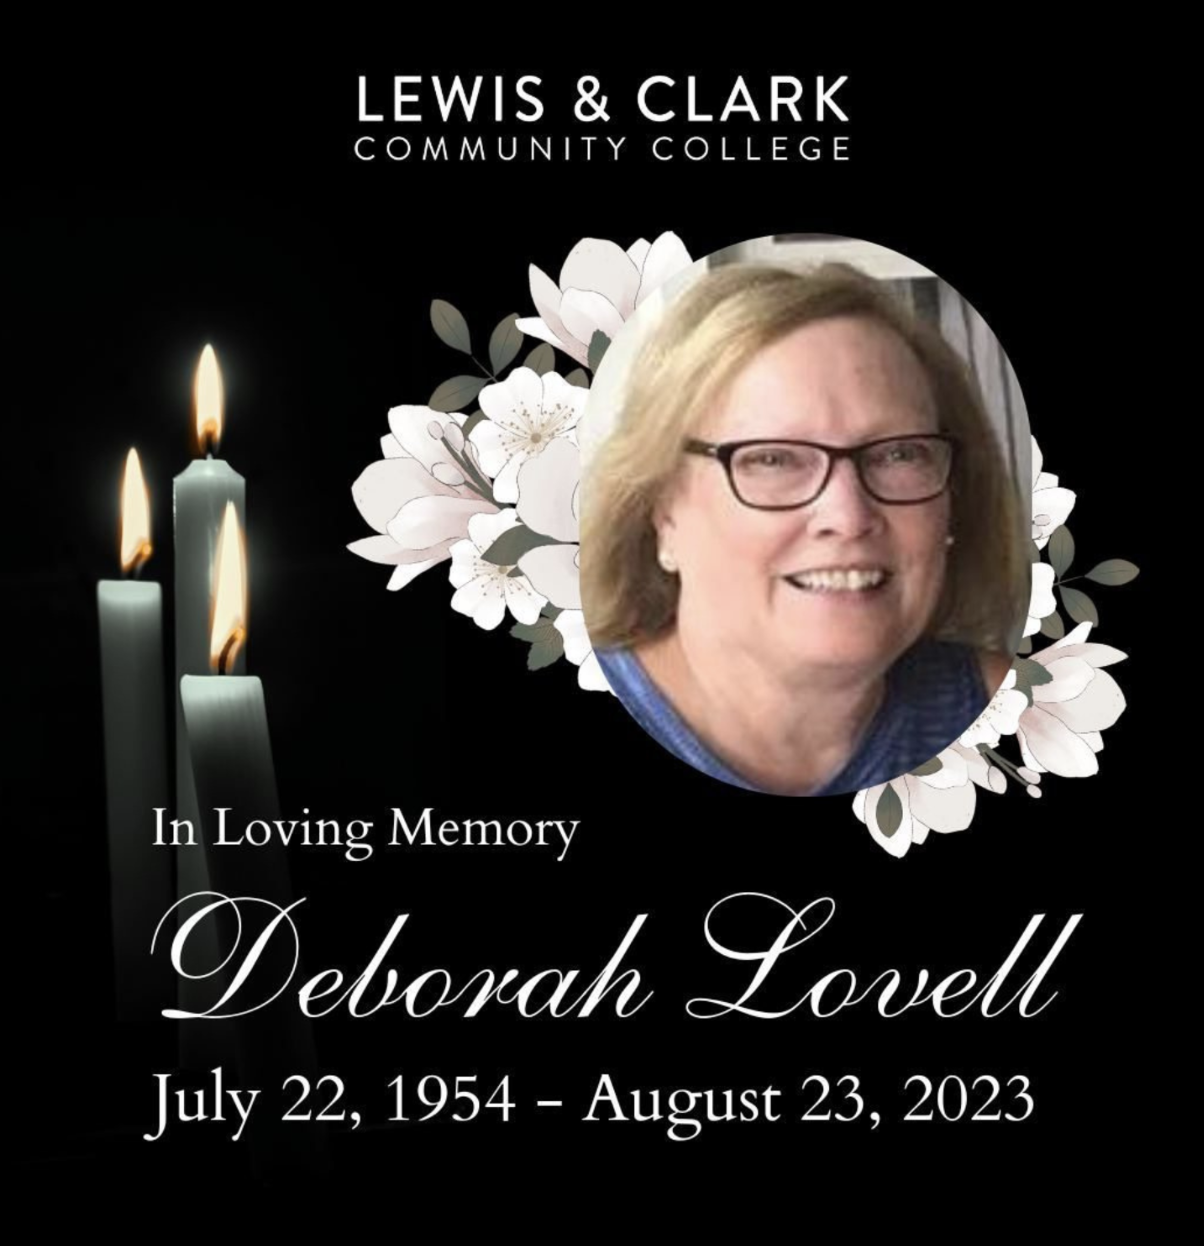 In a bittersweet farewell, the Lewis and Clark college community collectively mourns the passing of Deborah Lovell, a remarkable individual who dedicated nearly five decades of her life to the college.